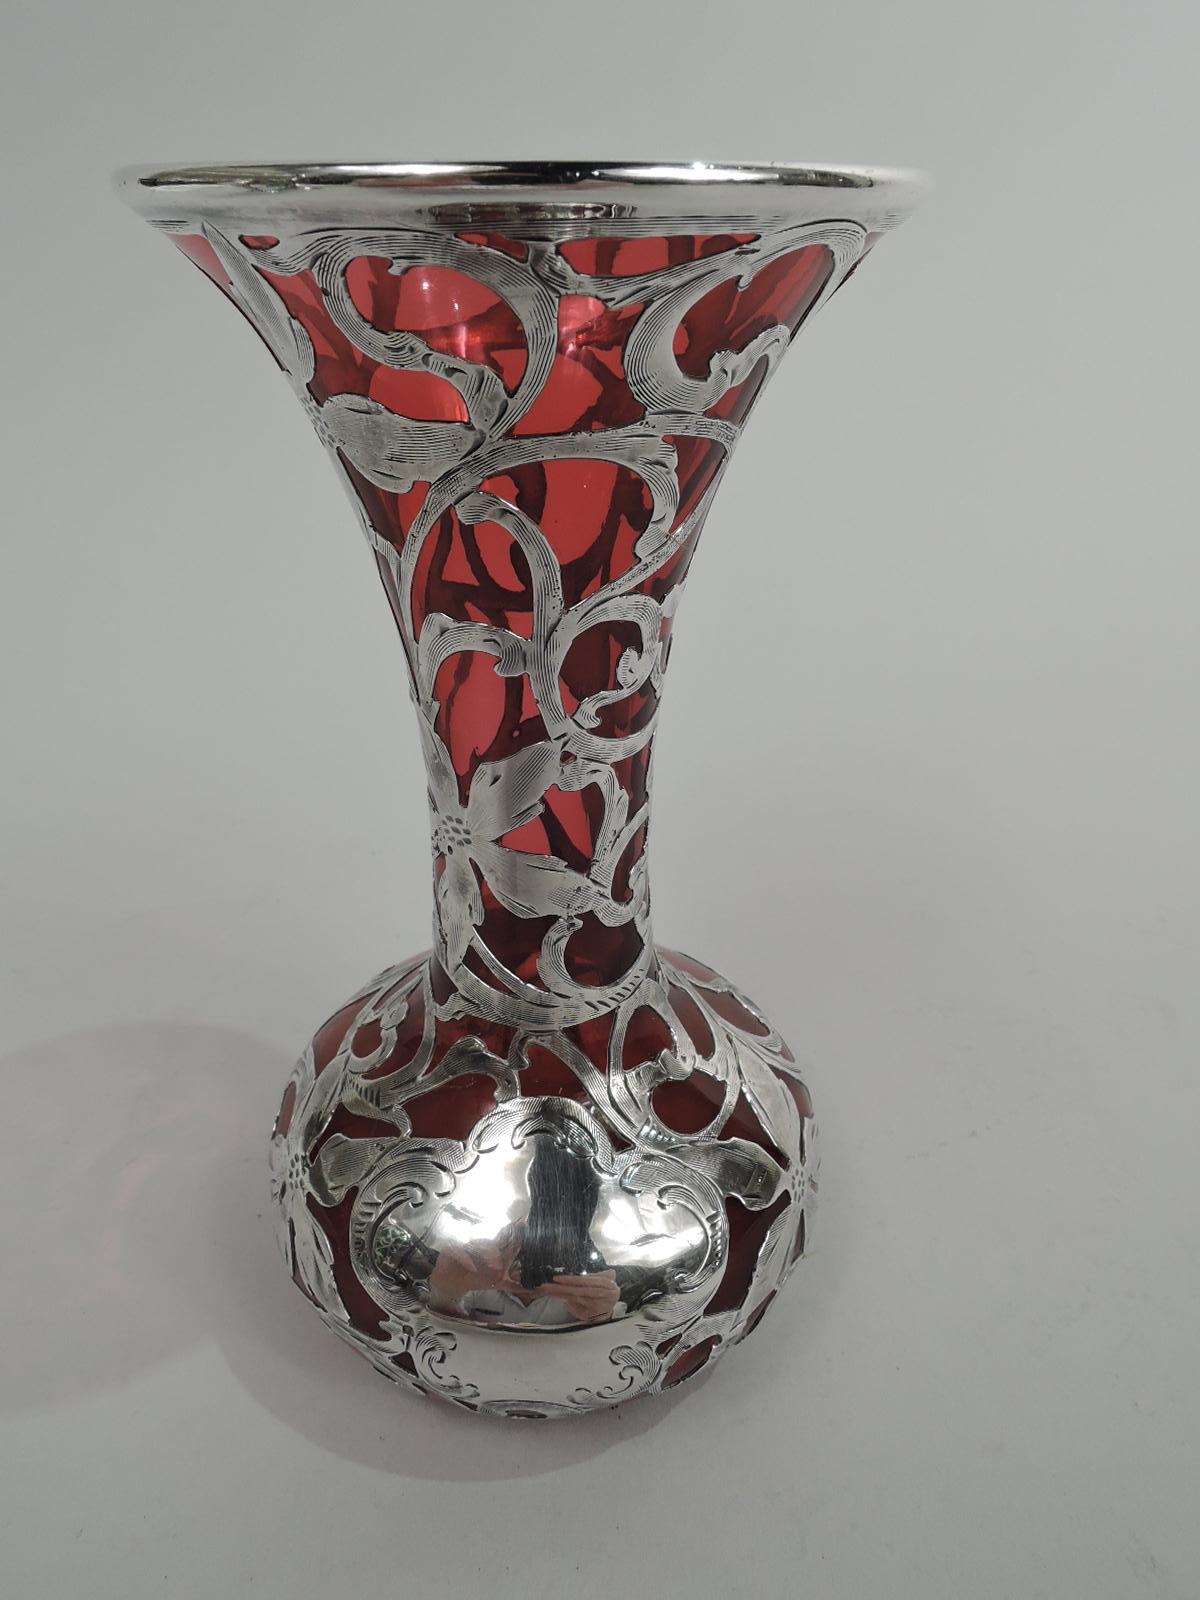 Turn-of-the-century Art Nouveau glass vase with engraved silver overlay. Made by Alvin Corporation in Providence. Conical mouth and neck and bellied bowl. Overlay in form of scrolled tendrils and flower heads, and scroll shaped cartouche (vacant).